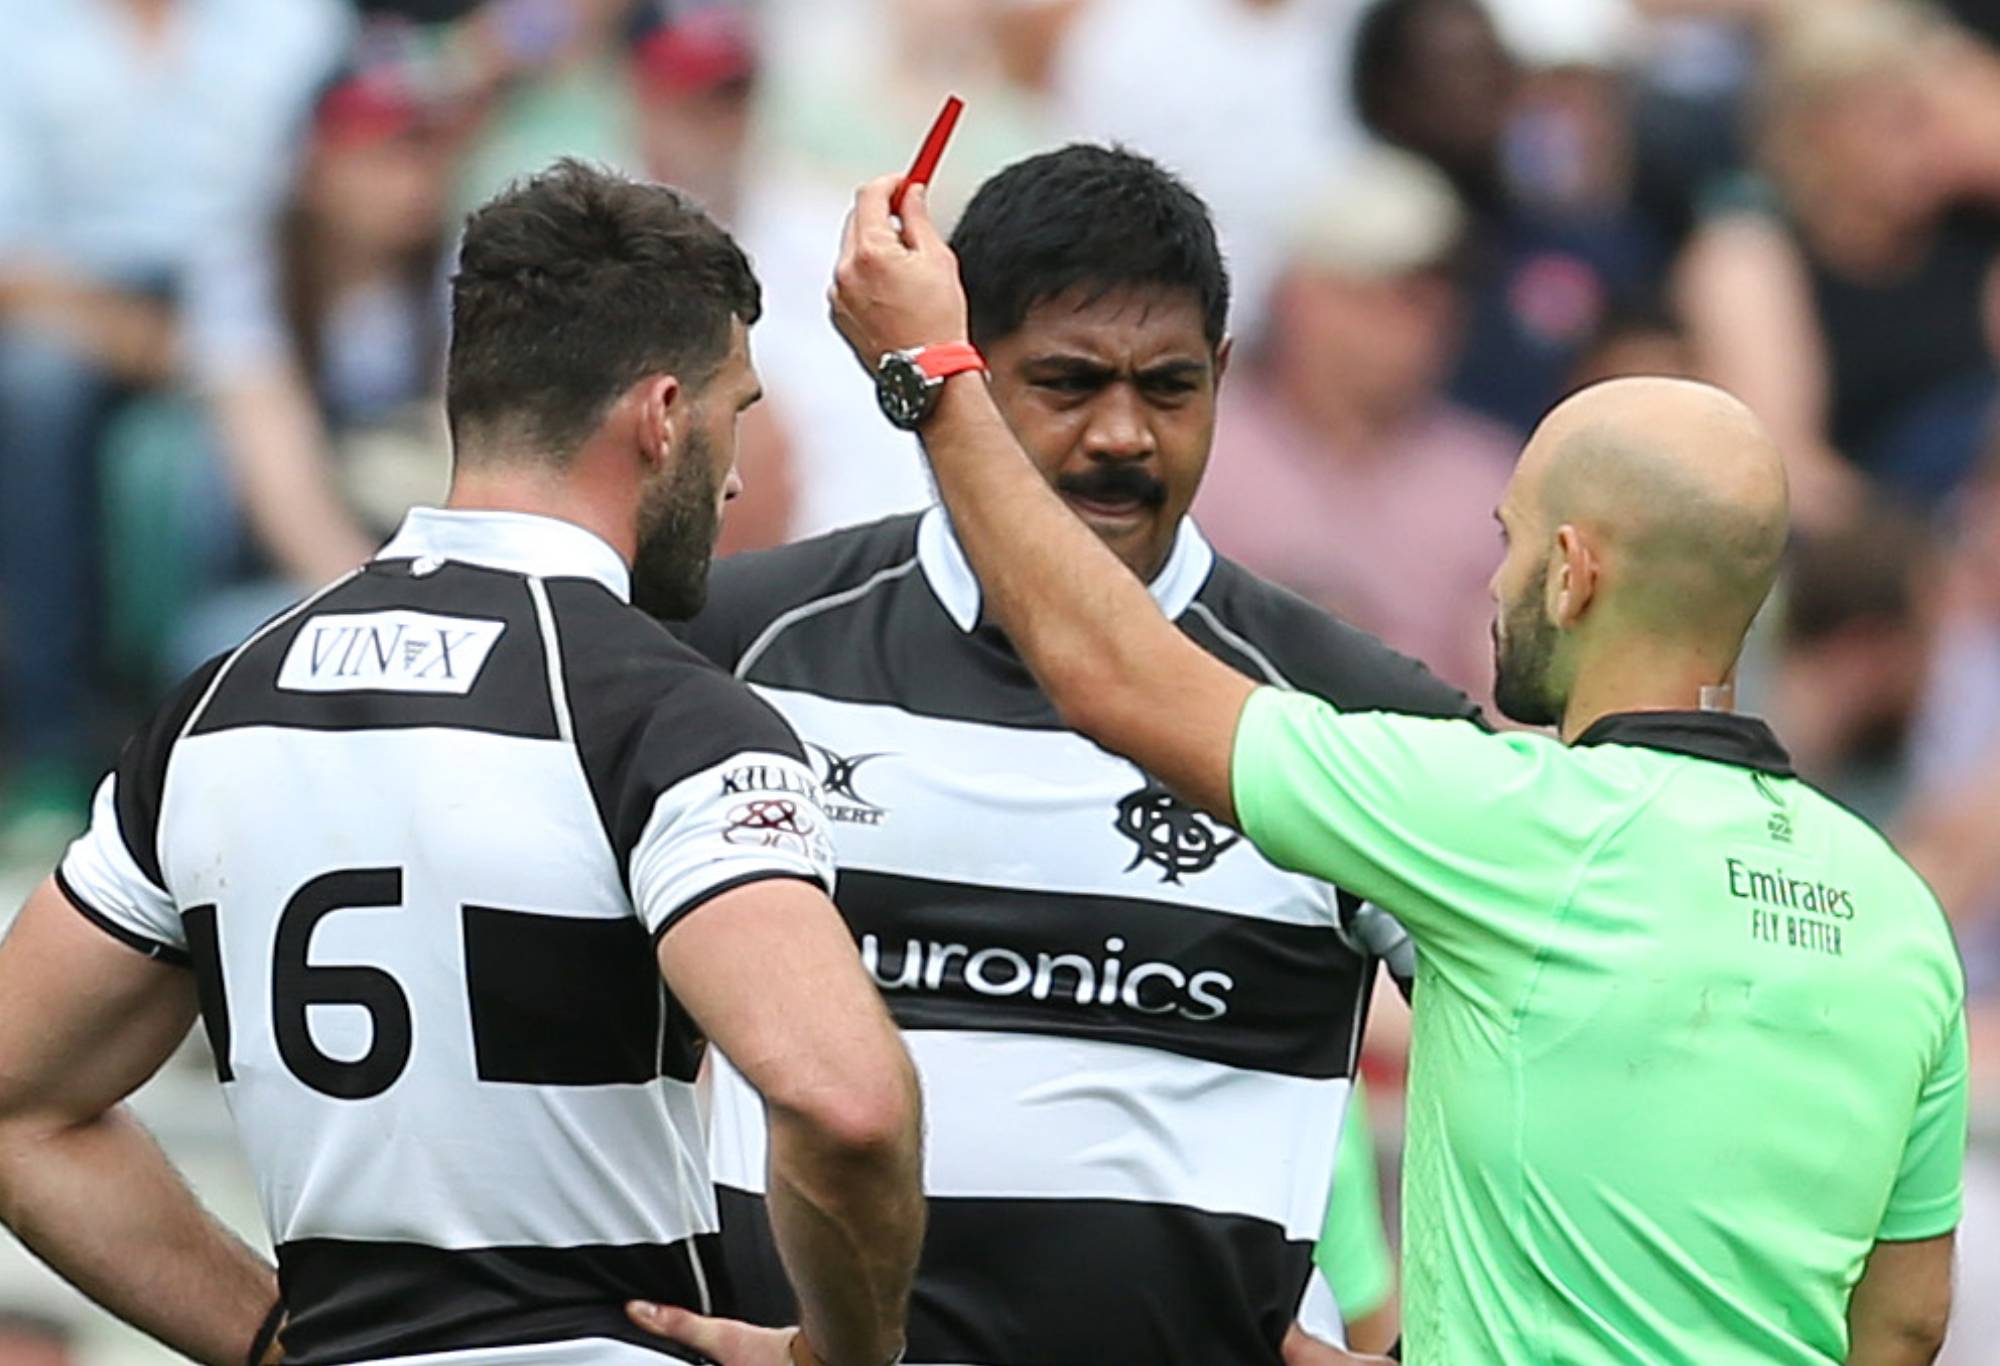 Will Skelton of Barbarians is shown a red card by Referee, Andrea Piardi during the International match between England and Barbarians at Twickenham Stadium on June 19, 2022 in London, England. (Photo by Steve Bardens/Getty Images for Barbarians)